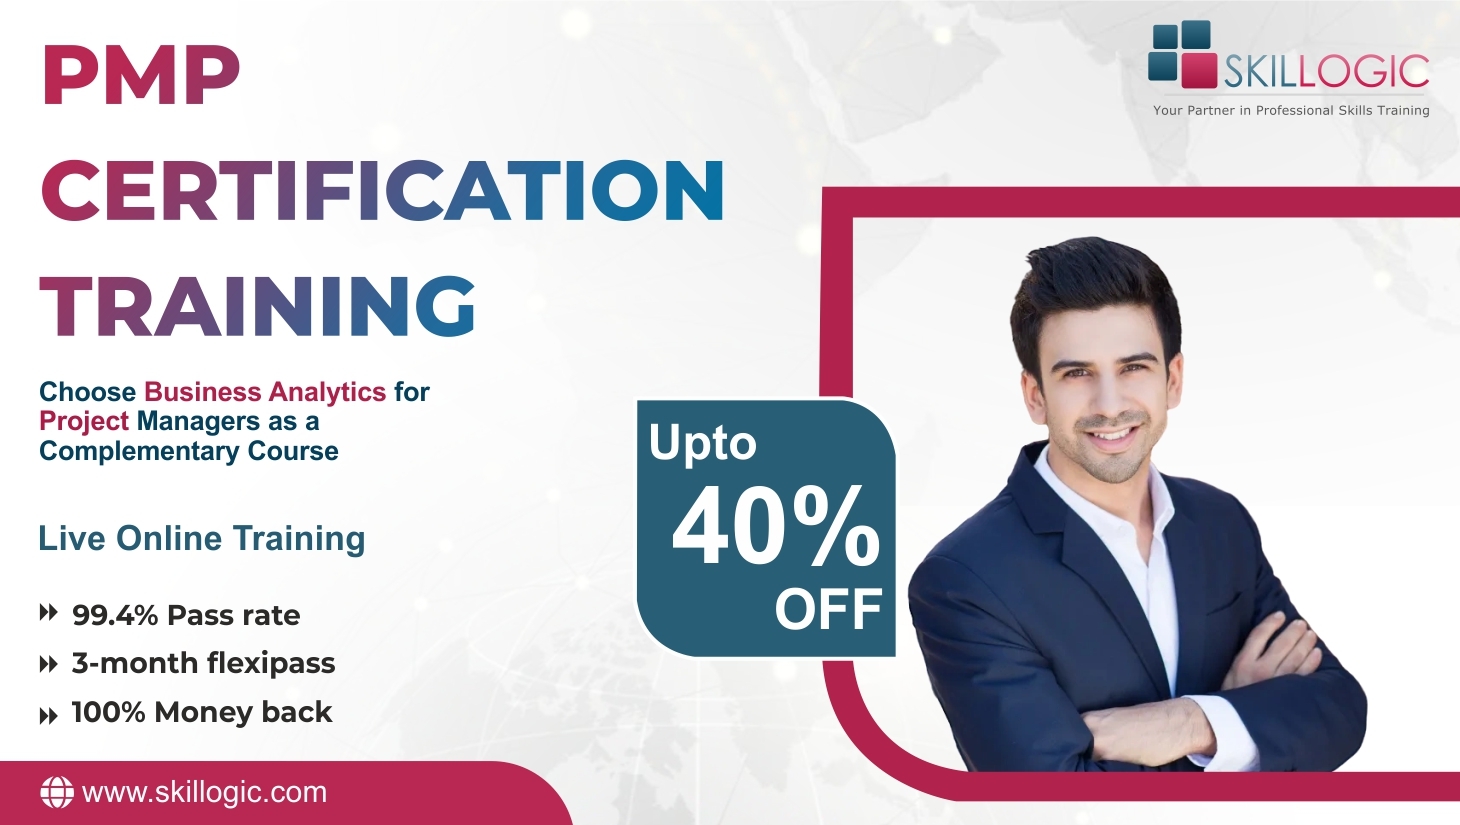 PMP CERTIFICATION TRAINING IN BANGALORE, Online Event